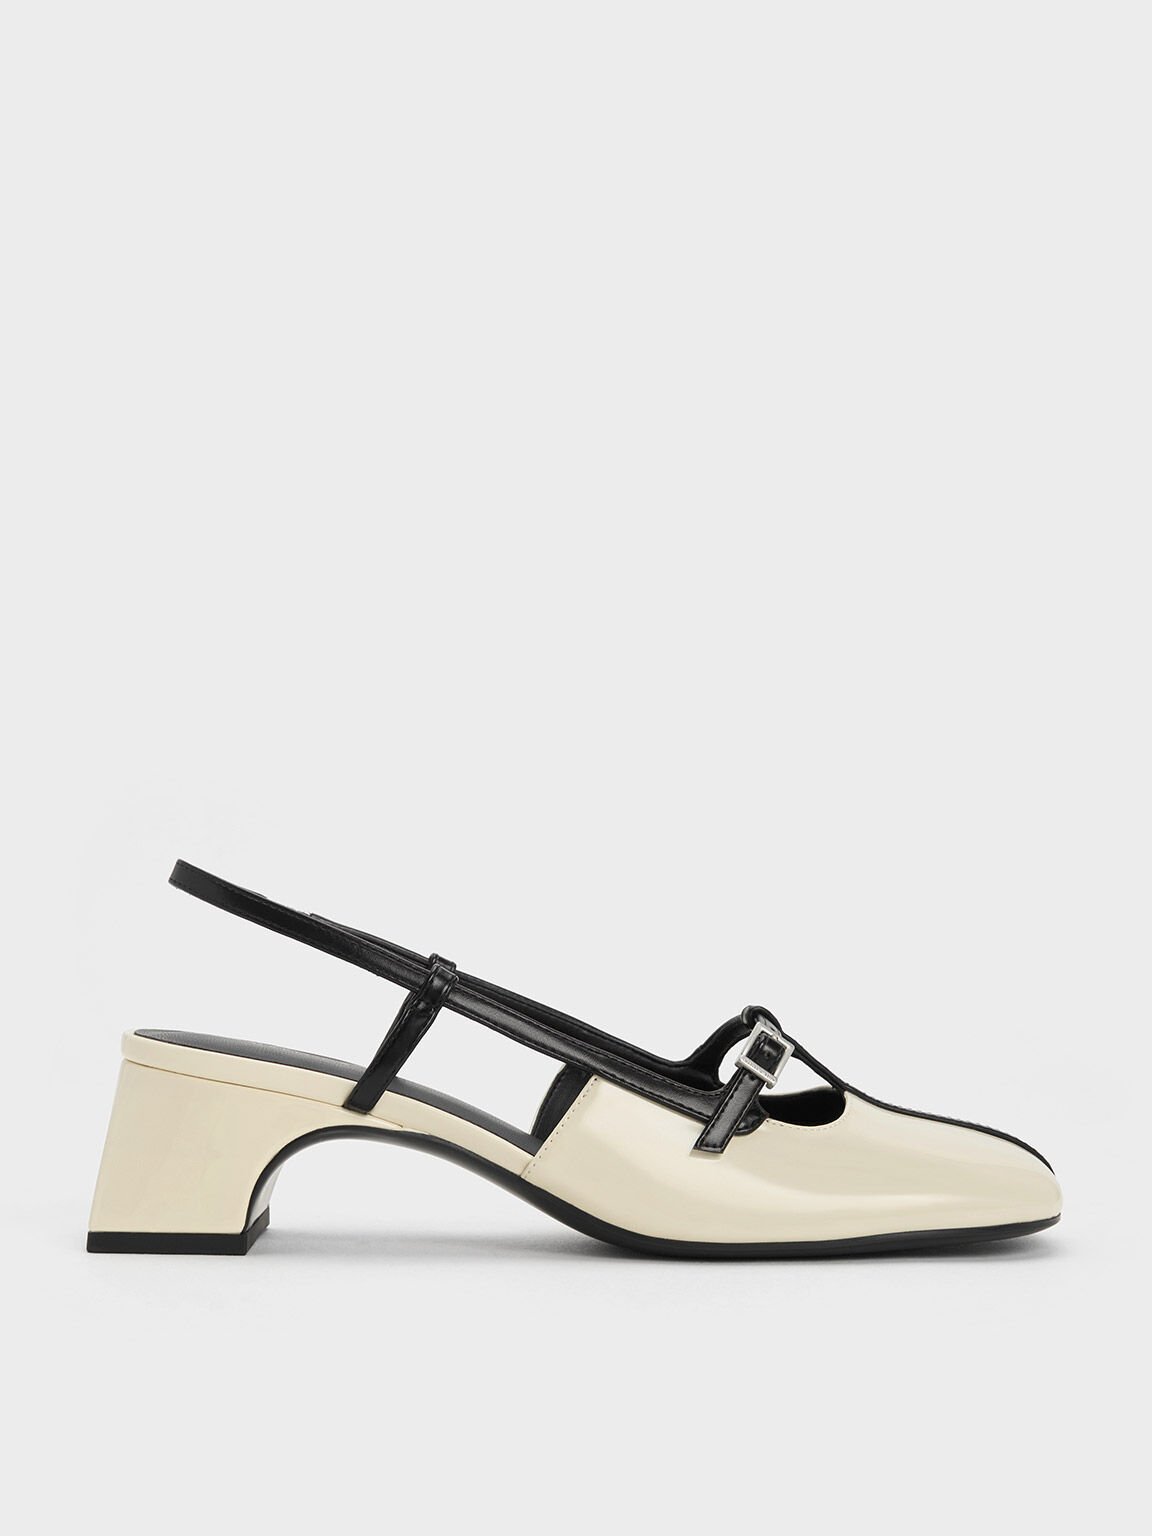 Charles & Keith Slingback Black Toe Heeled Shoes in White